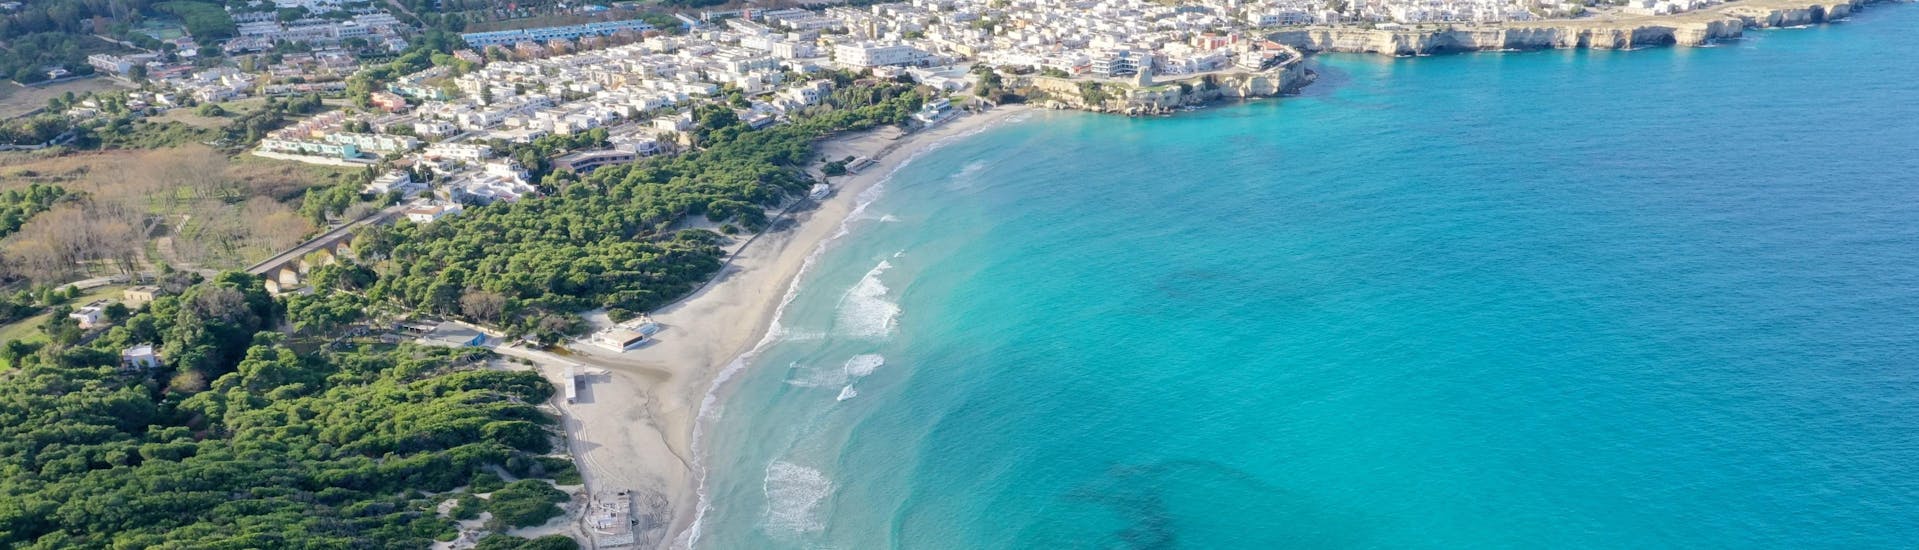 View of a stunning beach in Salento, Puglia, where providers offer boat trips.